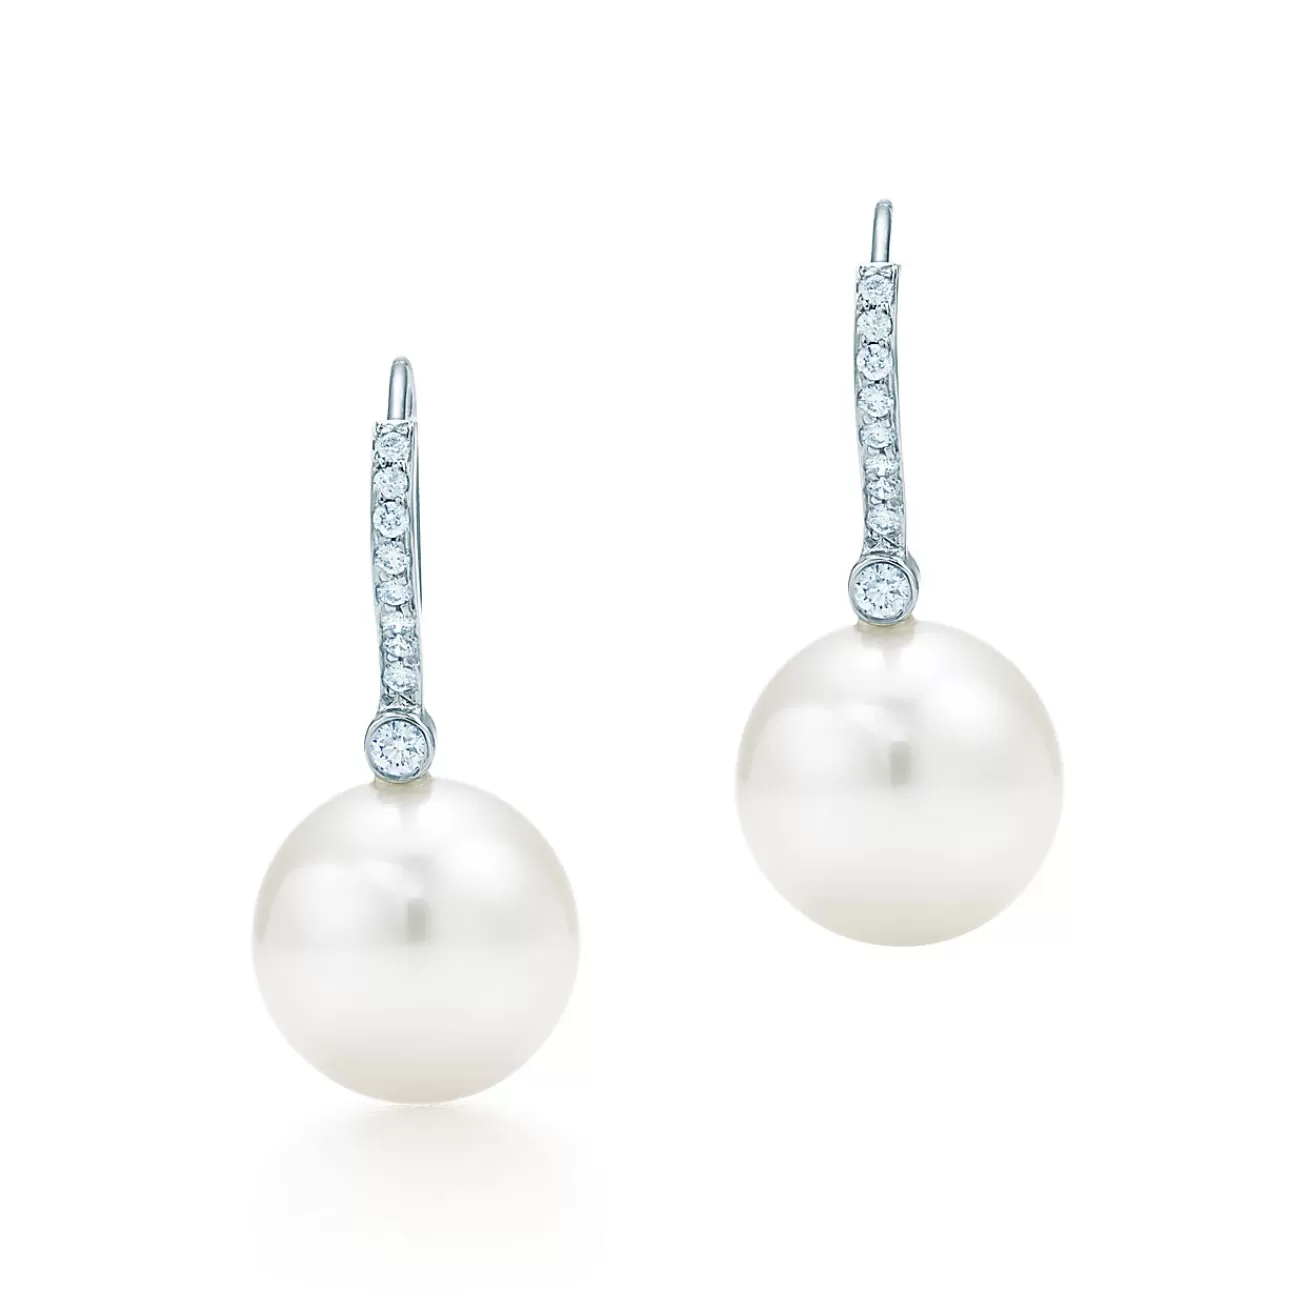 Tiffany & Co. Tiffany South Sea Noble earrings in platinum with cultured pearls and diamonds. | ^ Earrings | Platinum Jewelry